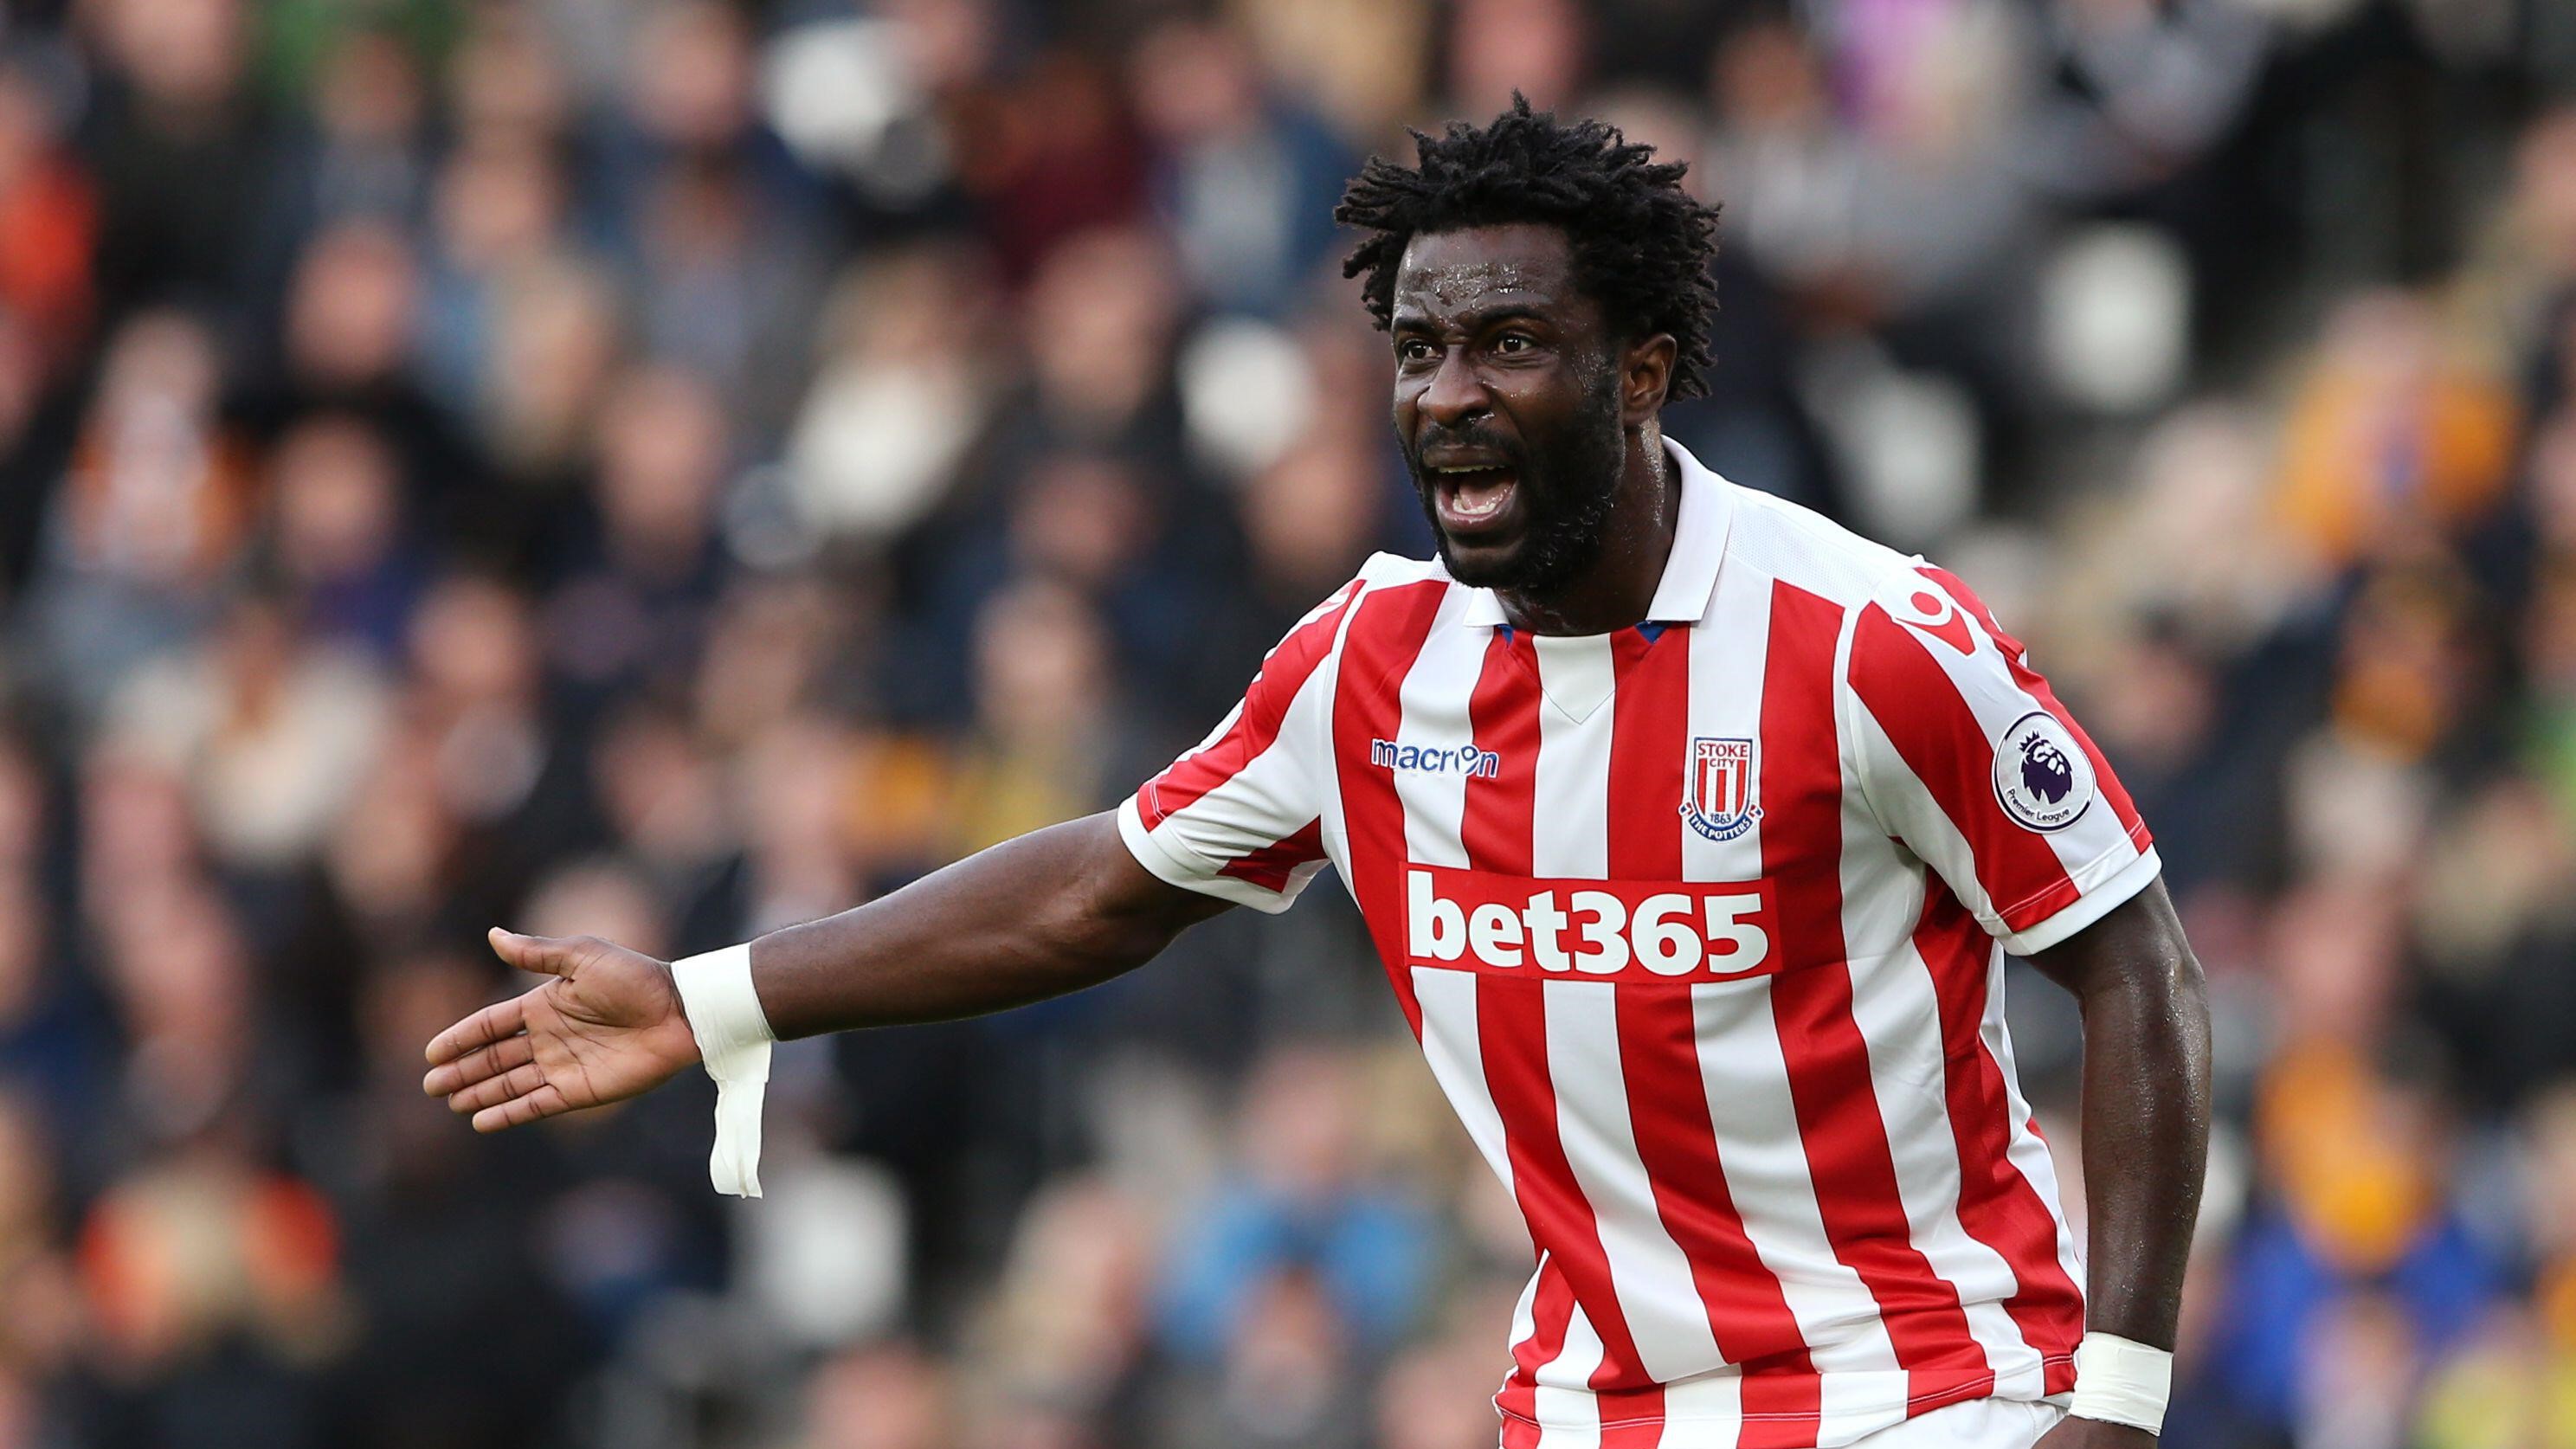 Wilfried Bony playing for the Potters.